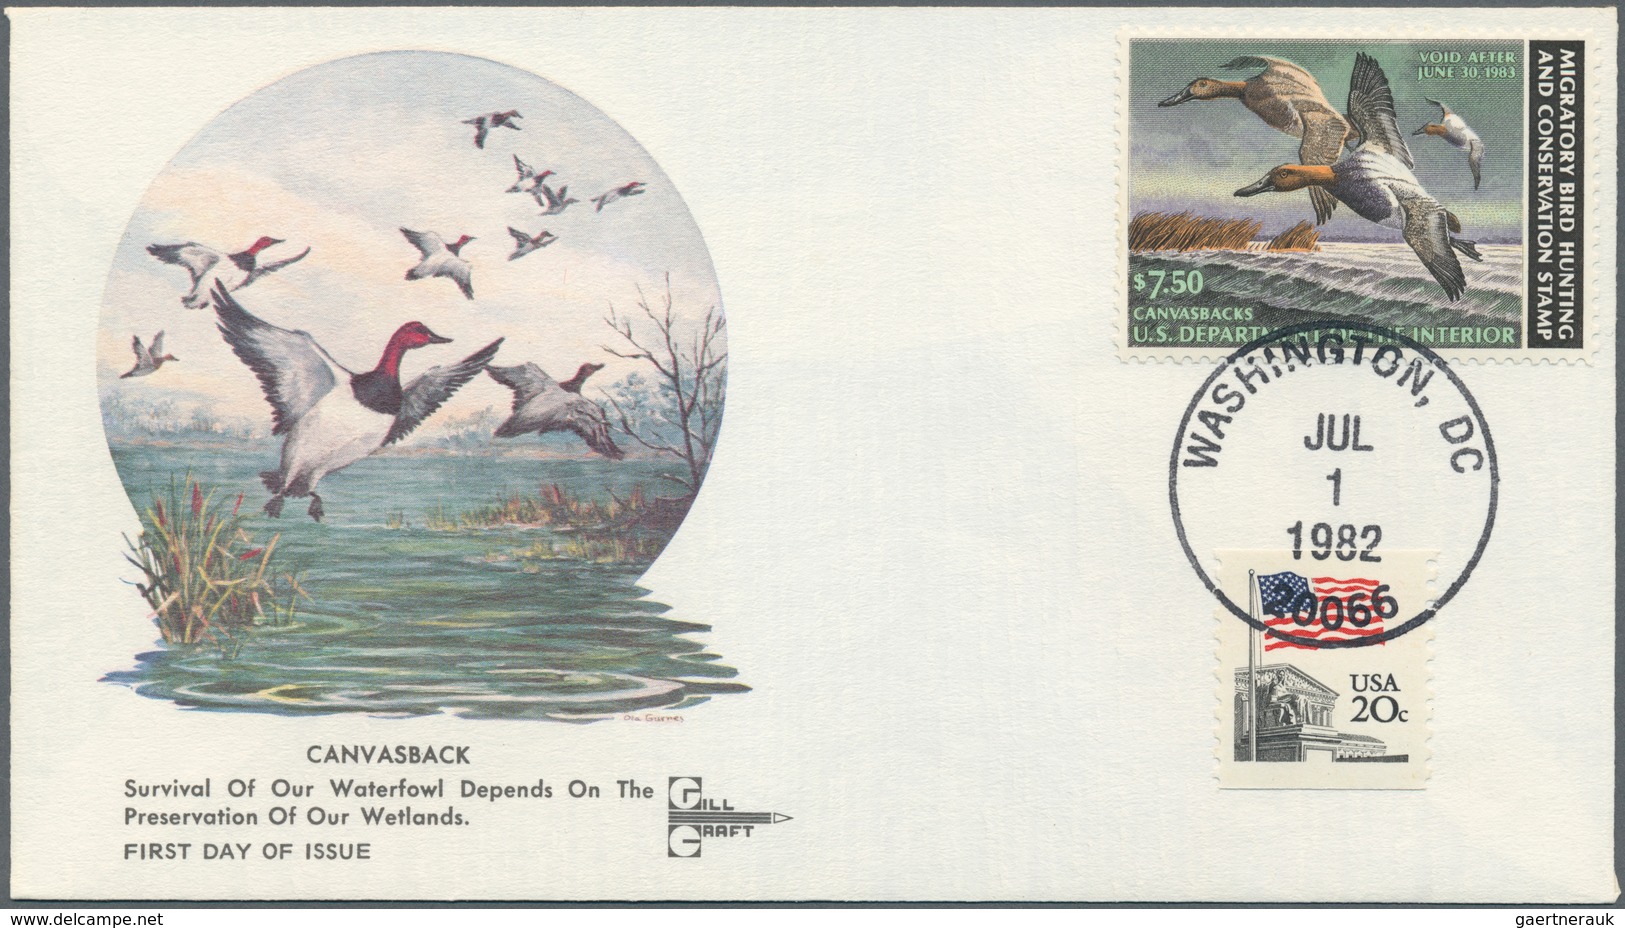 Vereinigte Staaten von Amerika: 1927/1981 (ca): approx 310 better FDC, mostly from the twenties and